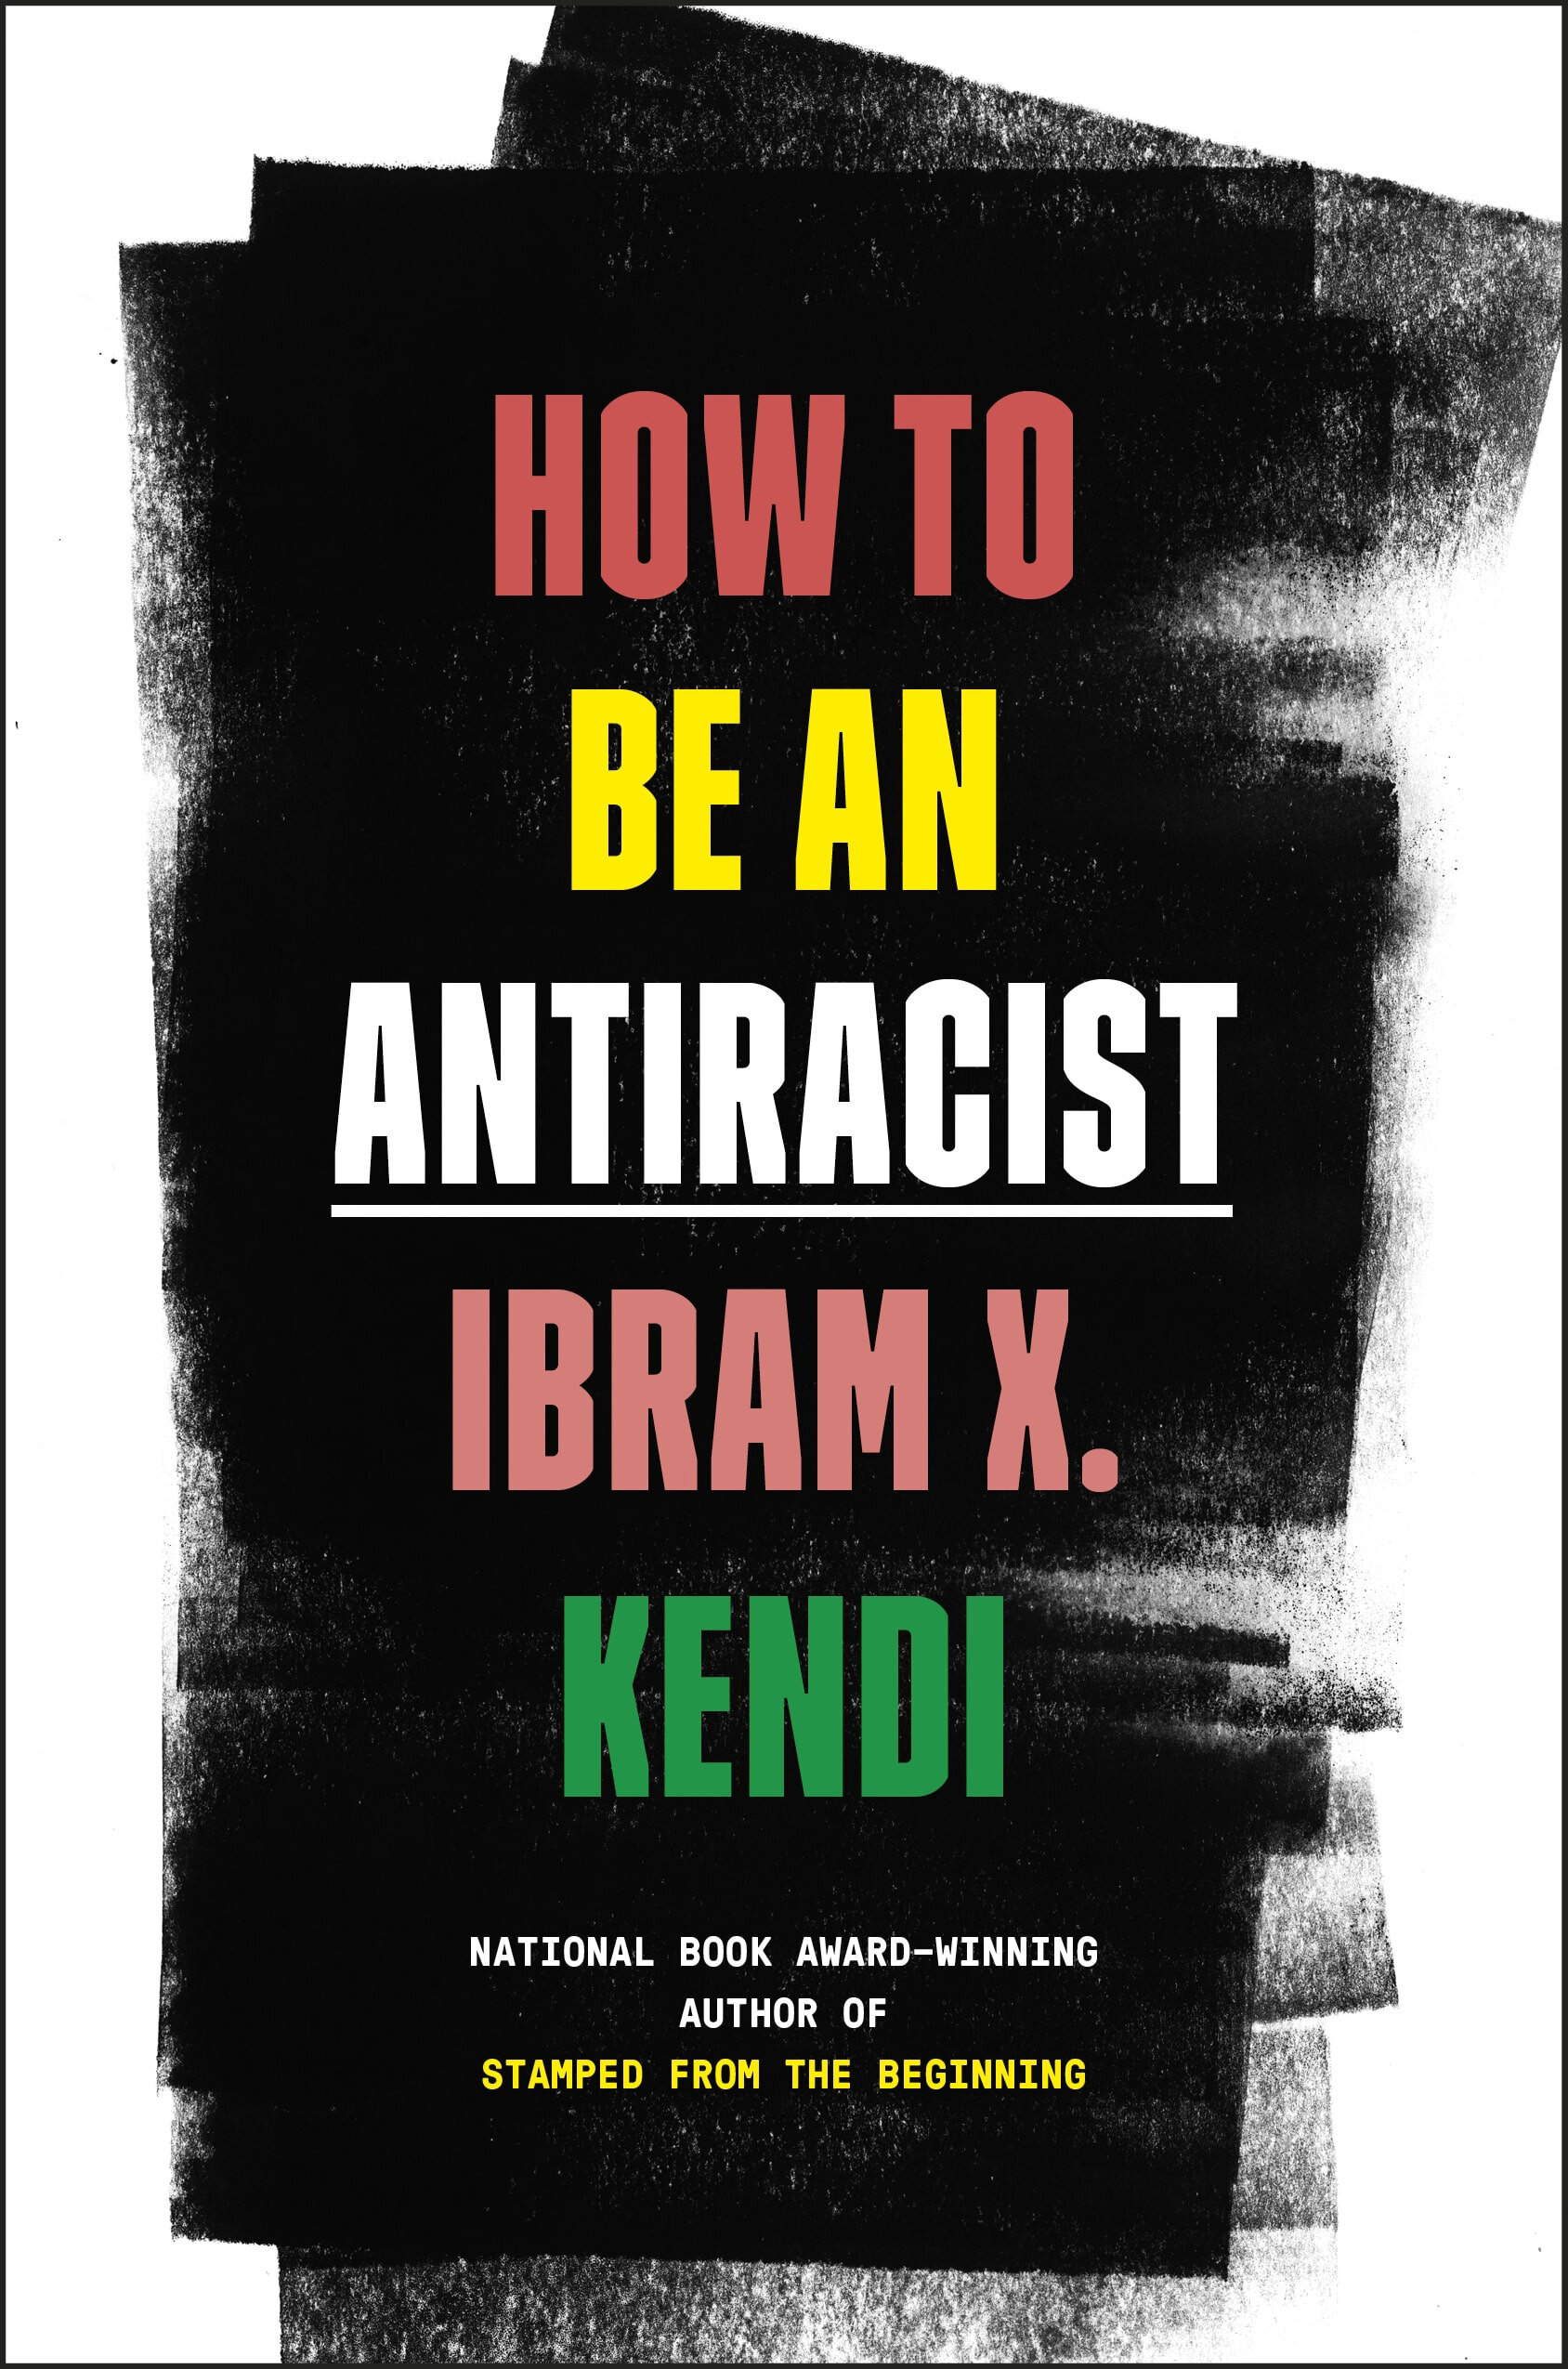 how-to-be-an-antiracist-by-ibram-x-kendi.jpg